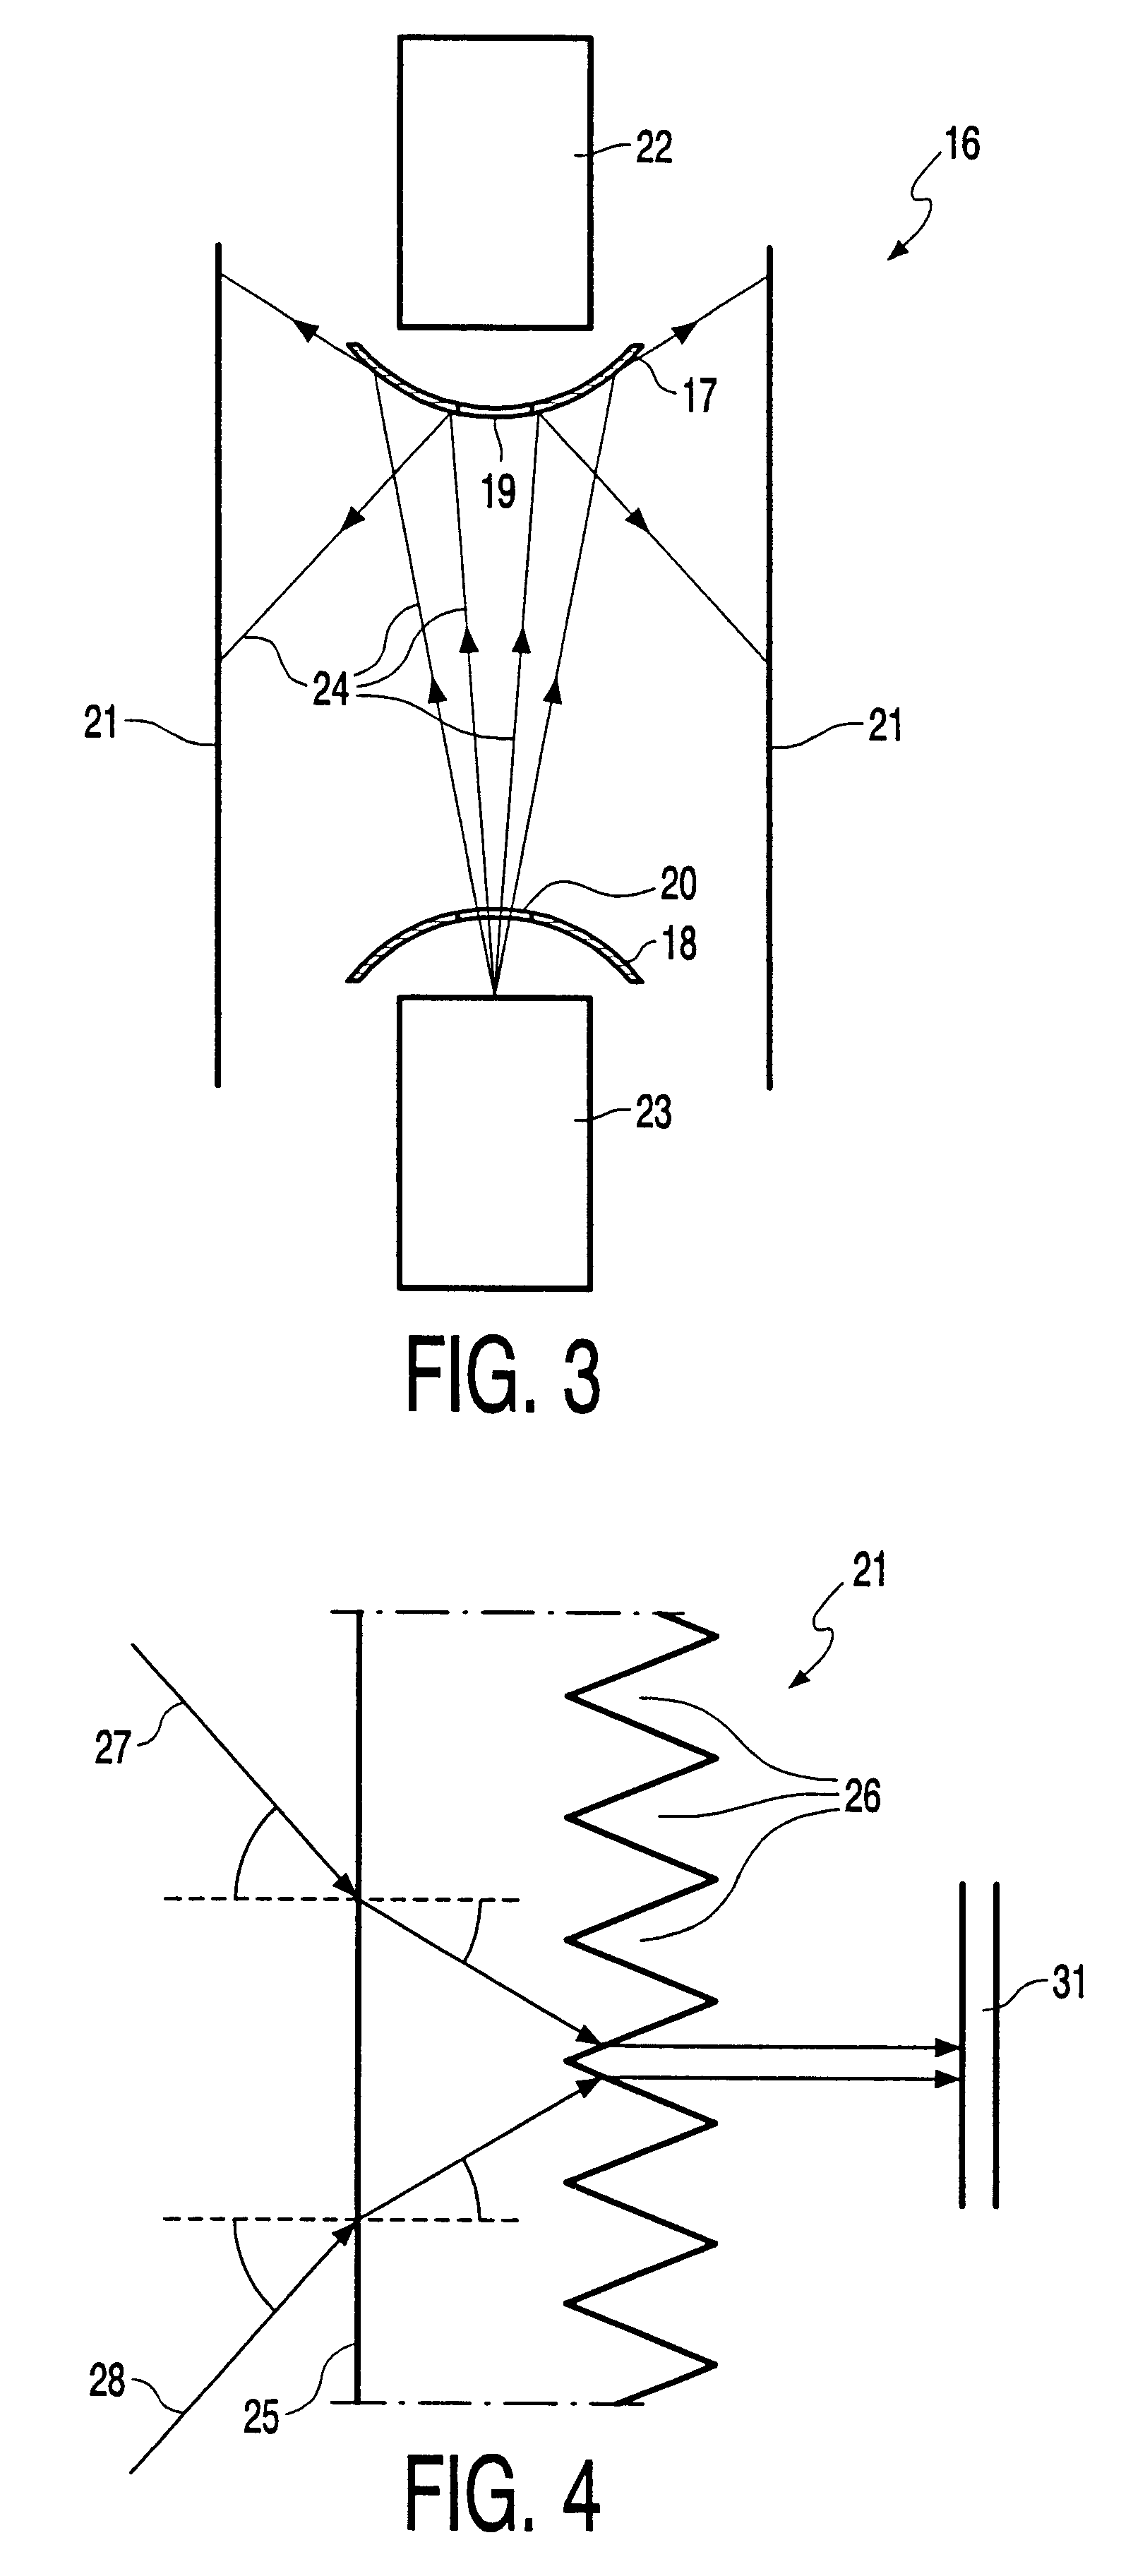 Display device having a cylindrical projection surface such that an image projected onto the inside is visible on the outside